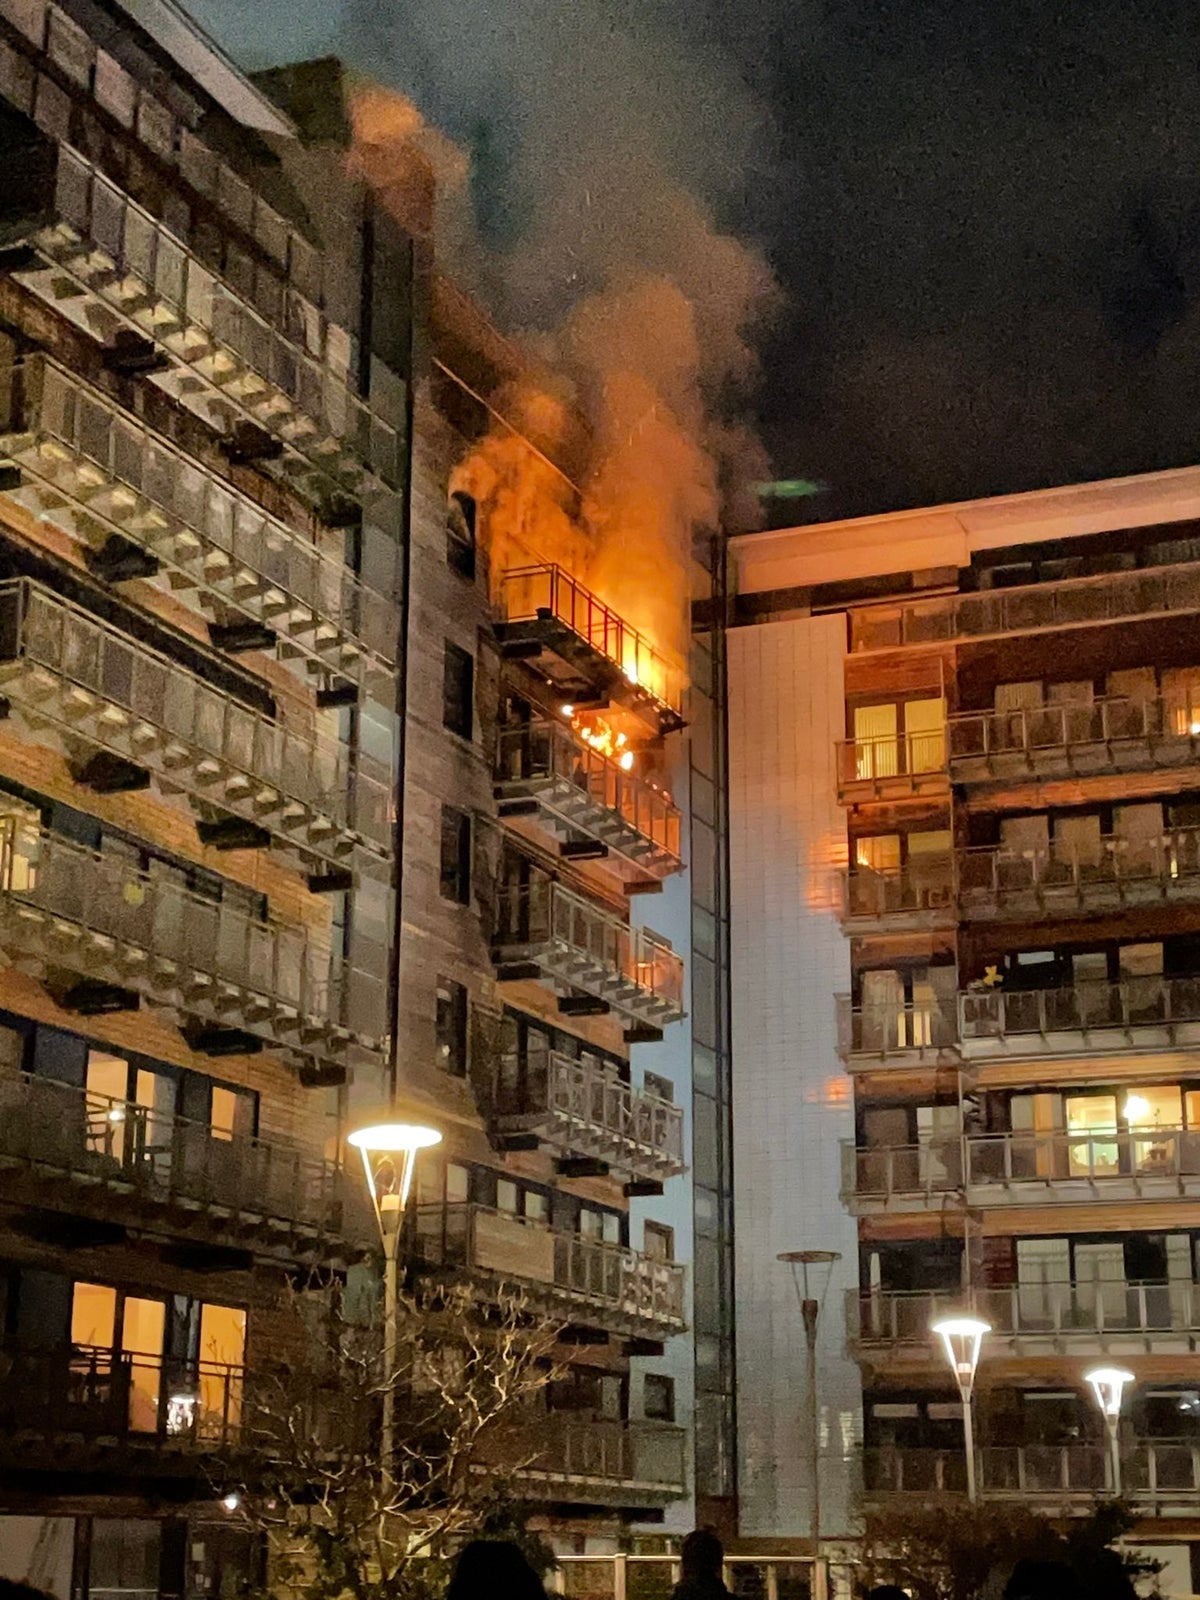 Edinburgh flat fire: Firefighter injured as apartments evacuated in early morning blaze